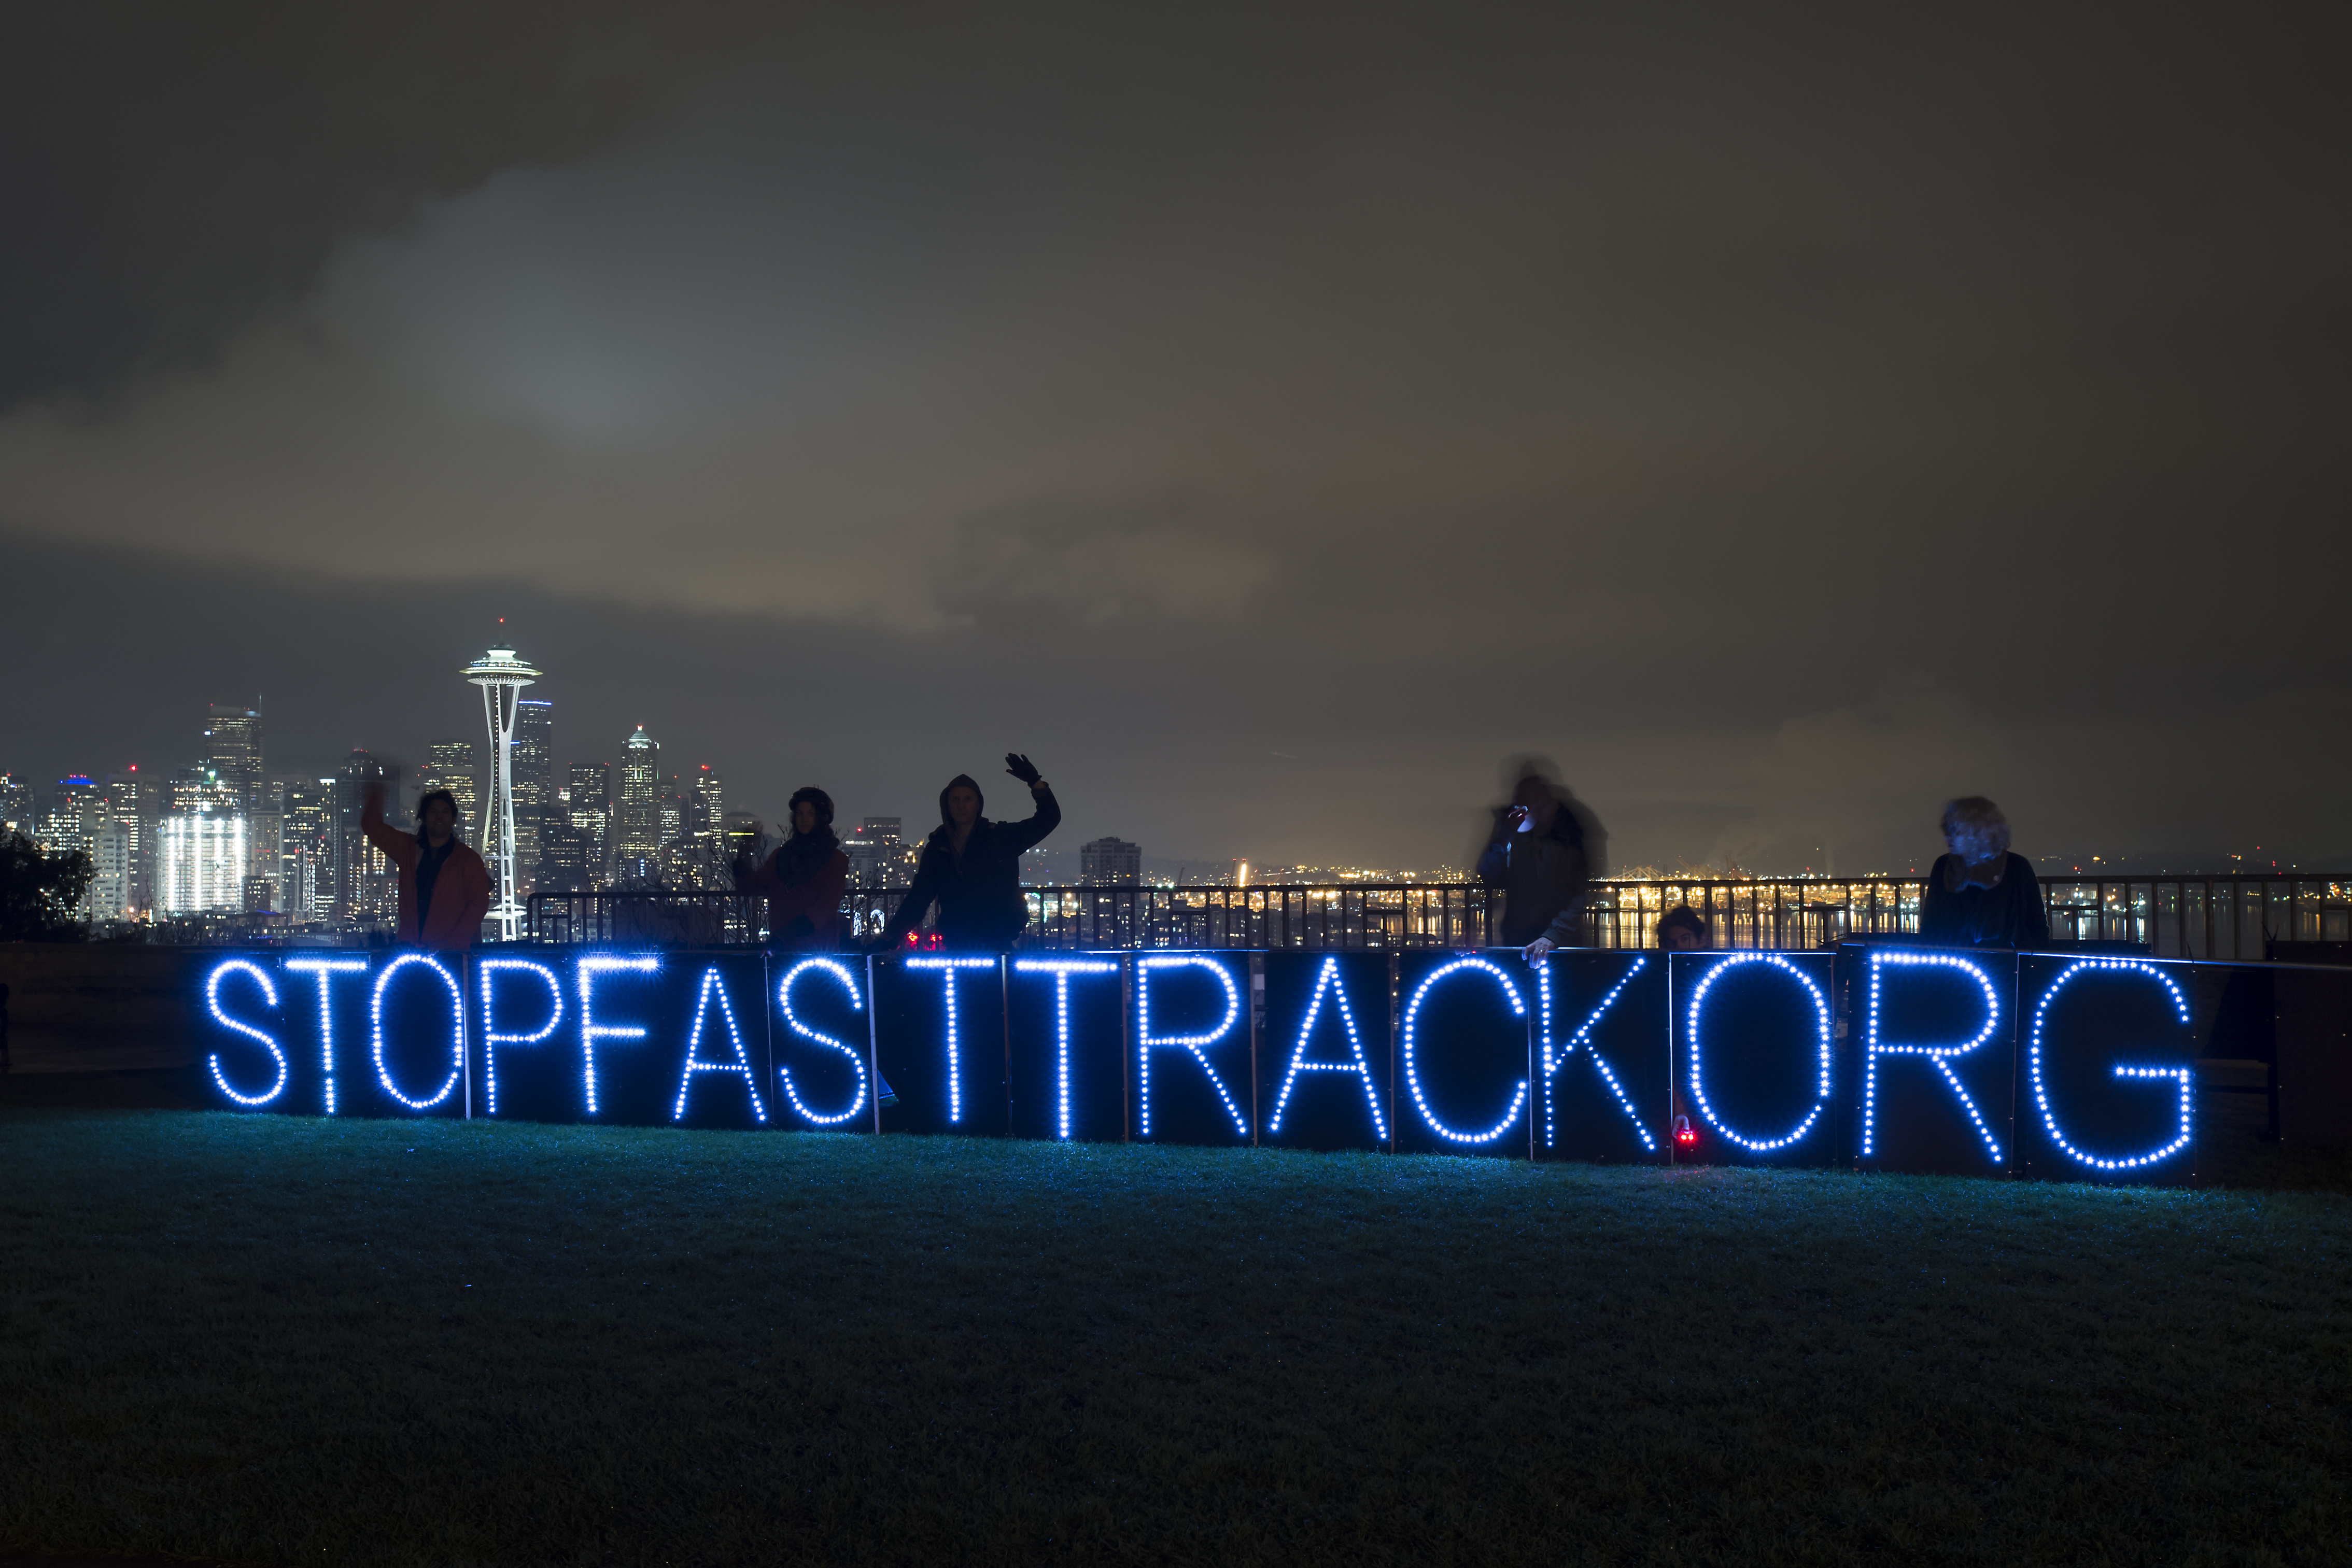 Fast Track Signed by Obama | ARC20204537 x 3025